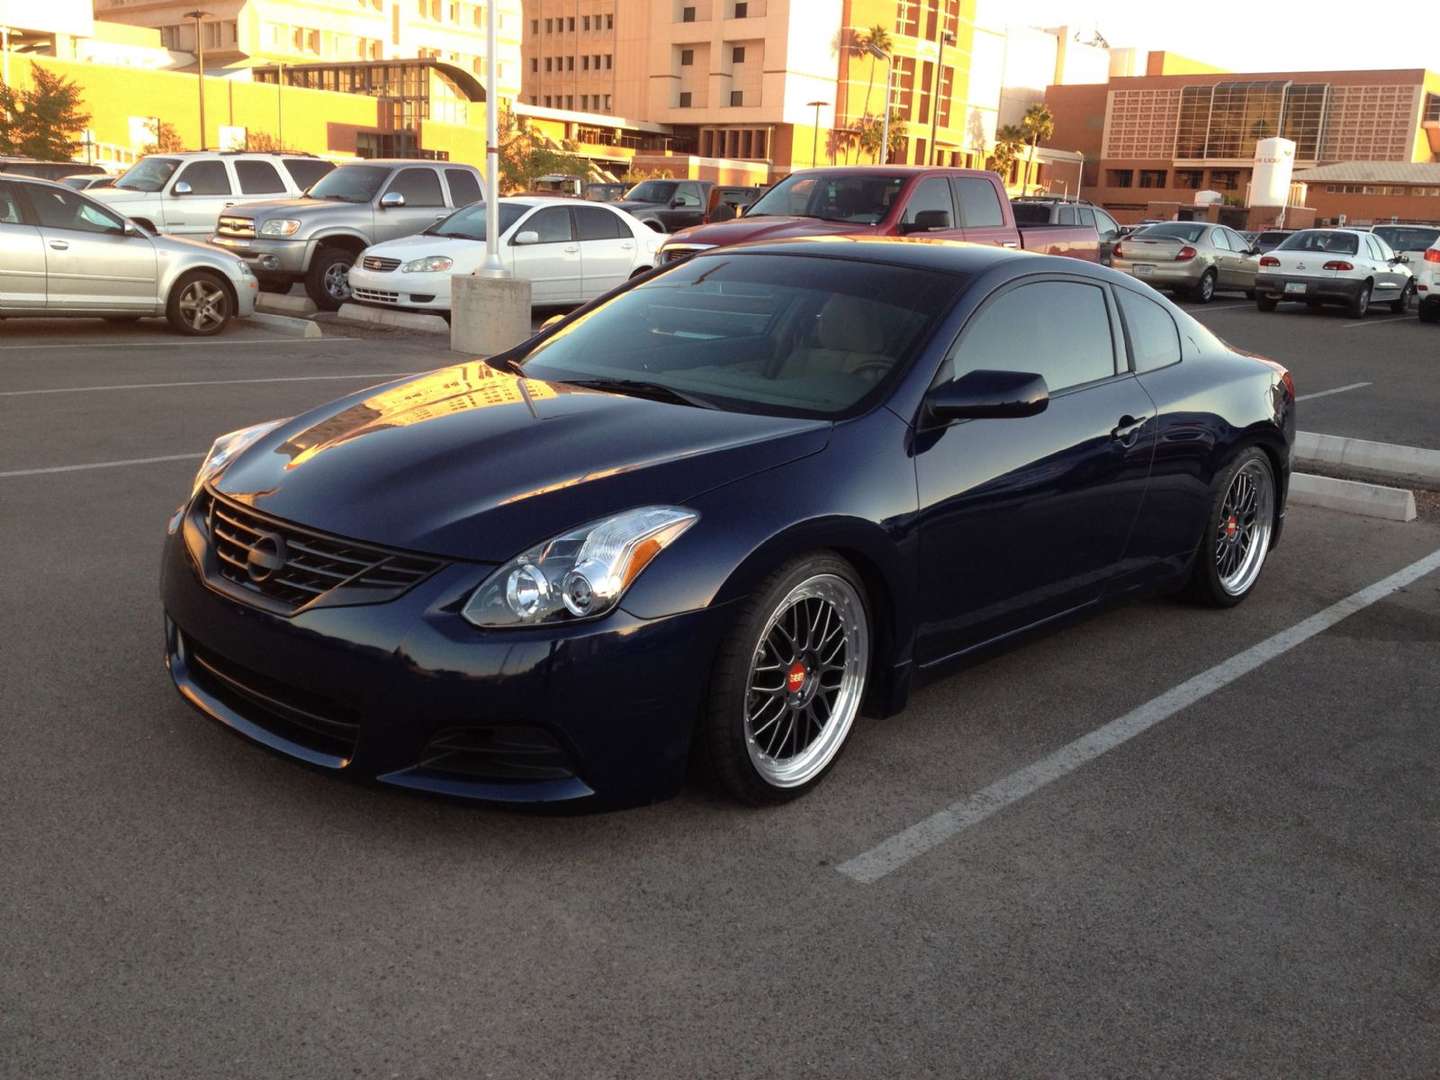 Nissan Altima Coupe #9660773